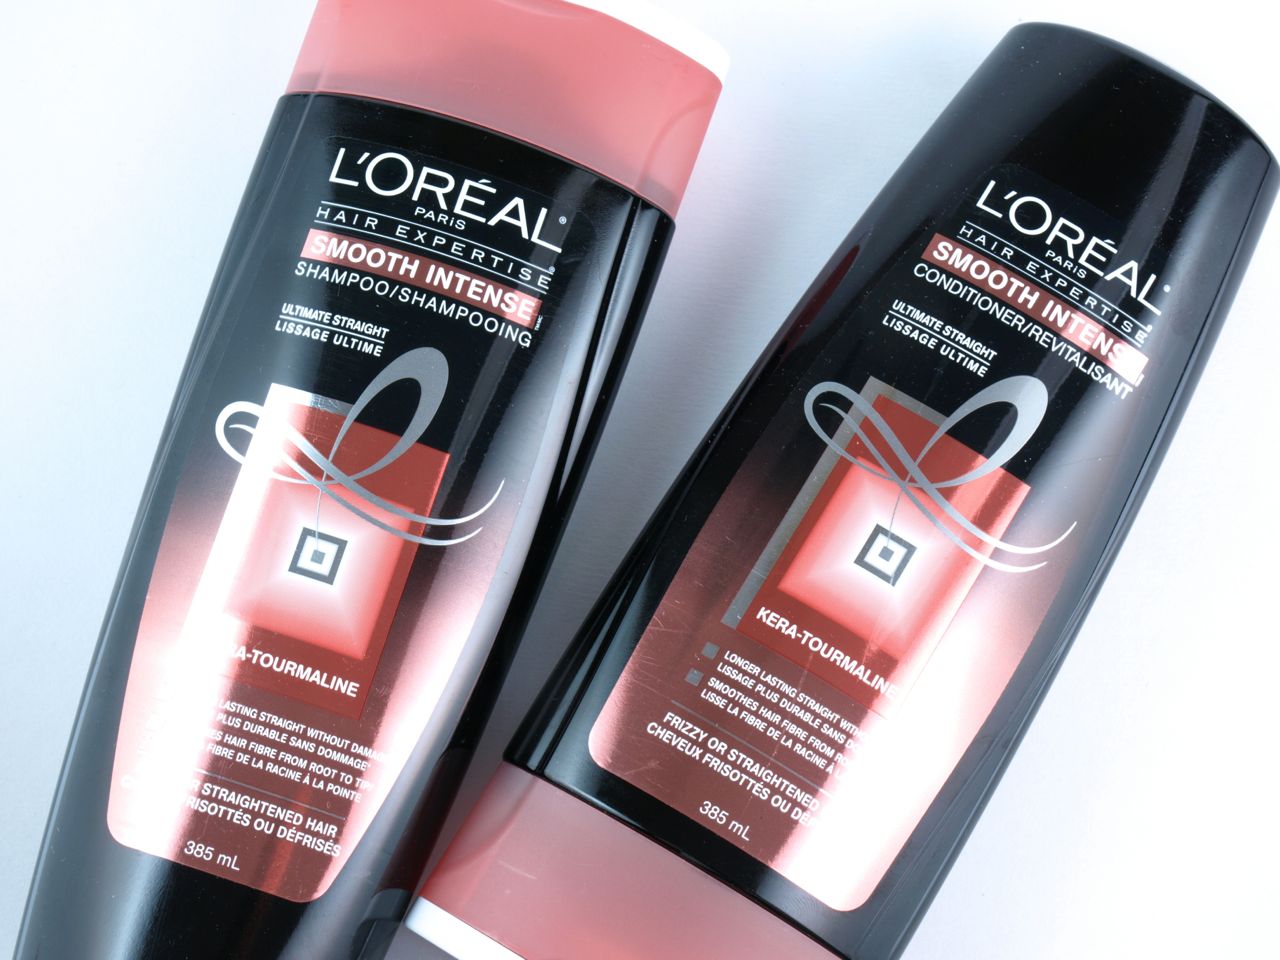 L'Oreal Paris Hair Expertise Smooth Intense Care Review | The Happy Sloths: Beauty, Makeup, and Skincare Blog with Reviews and Swatches